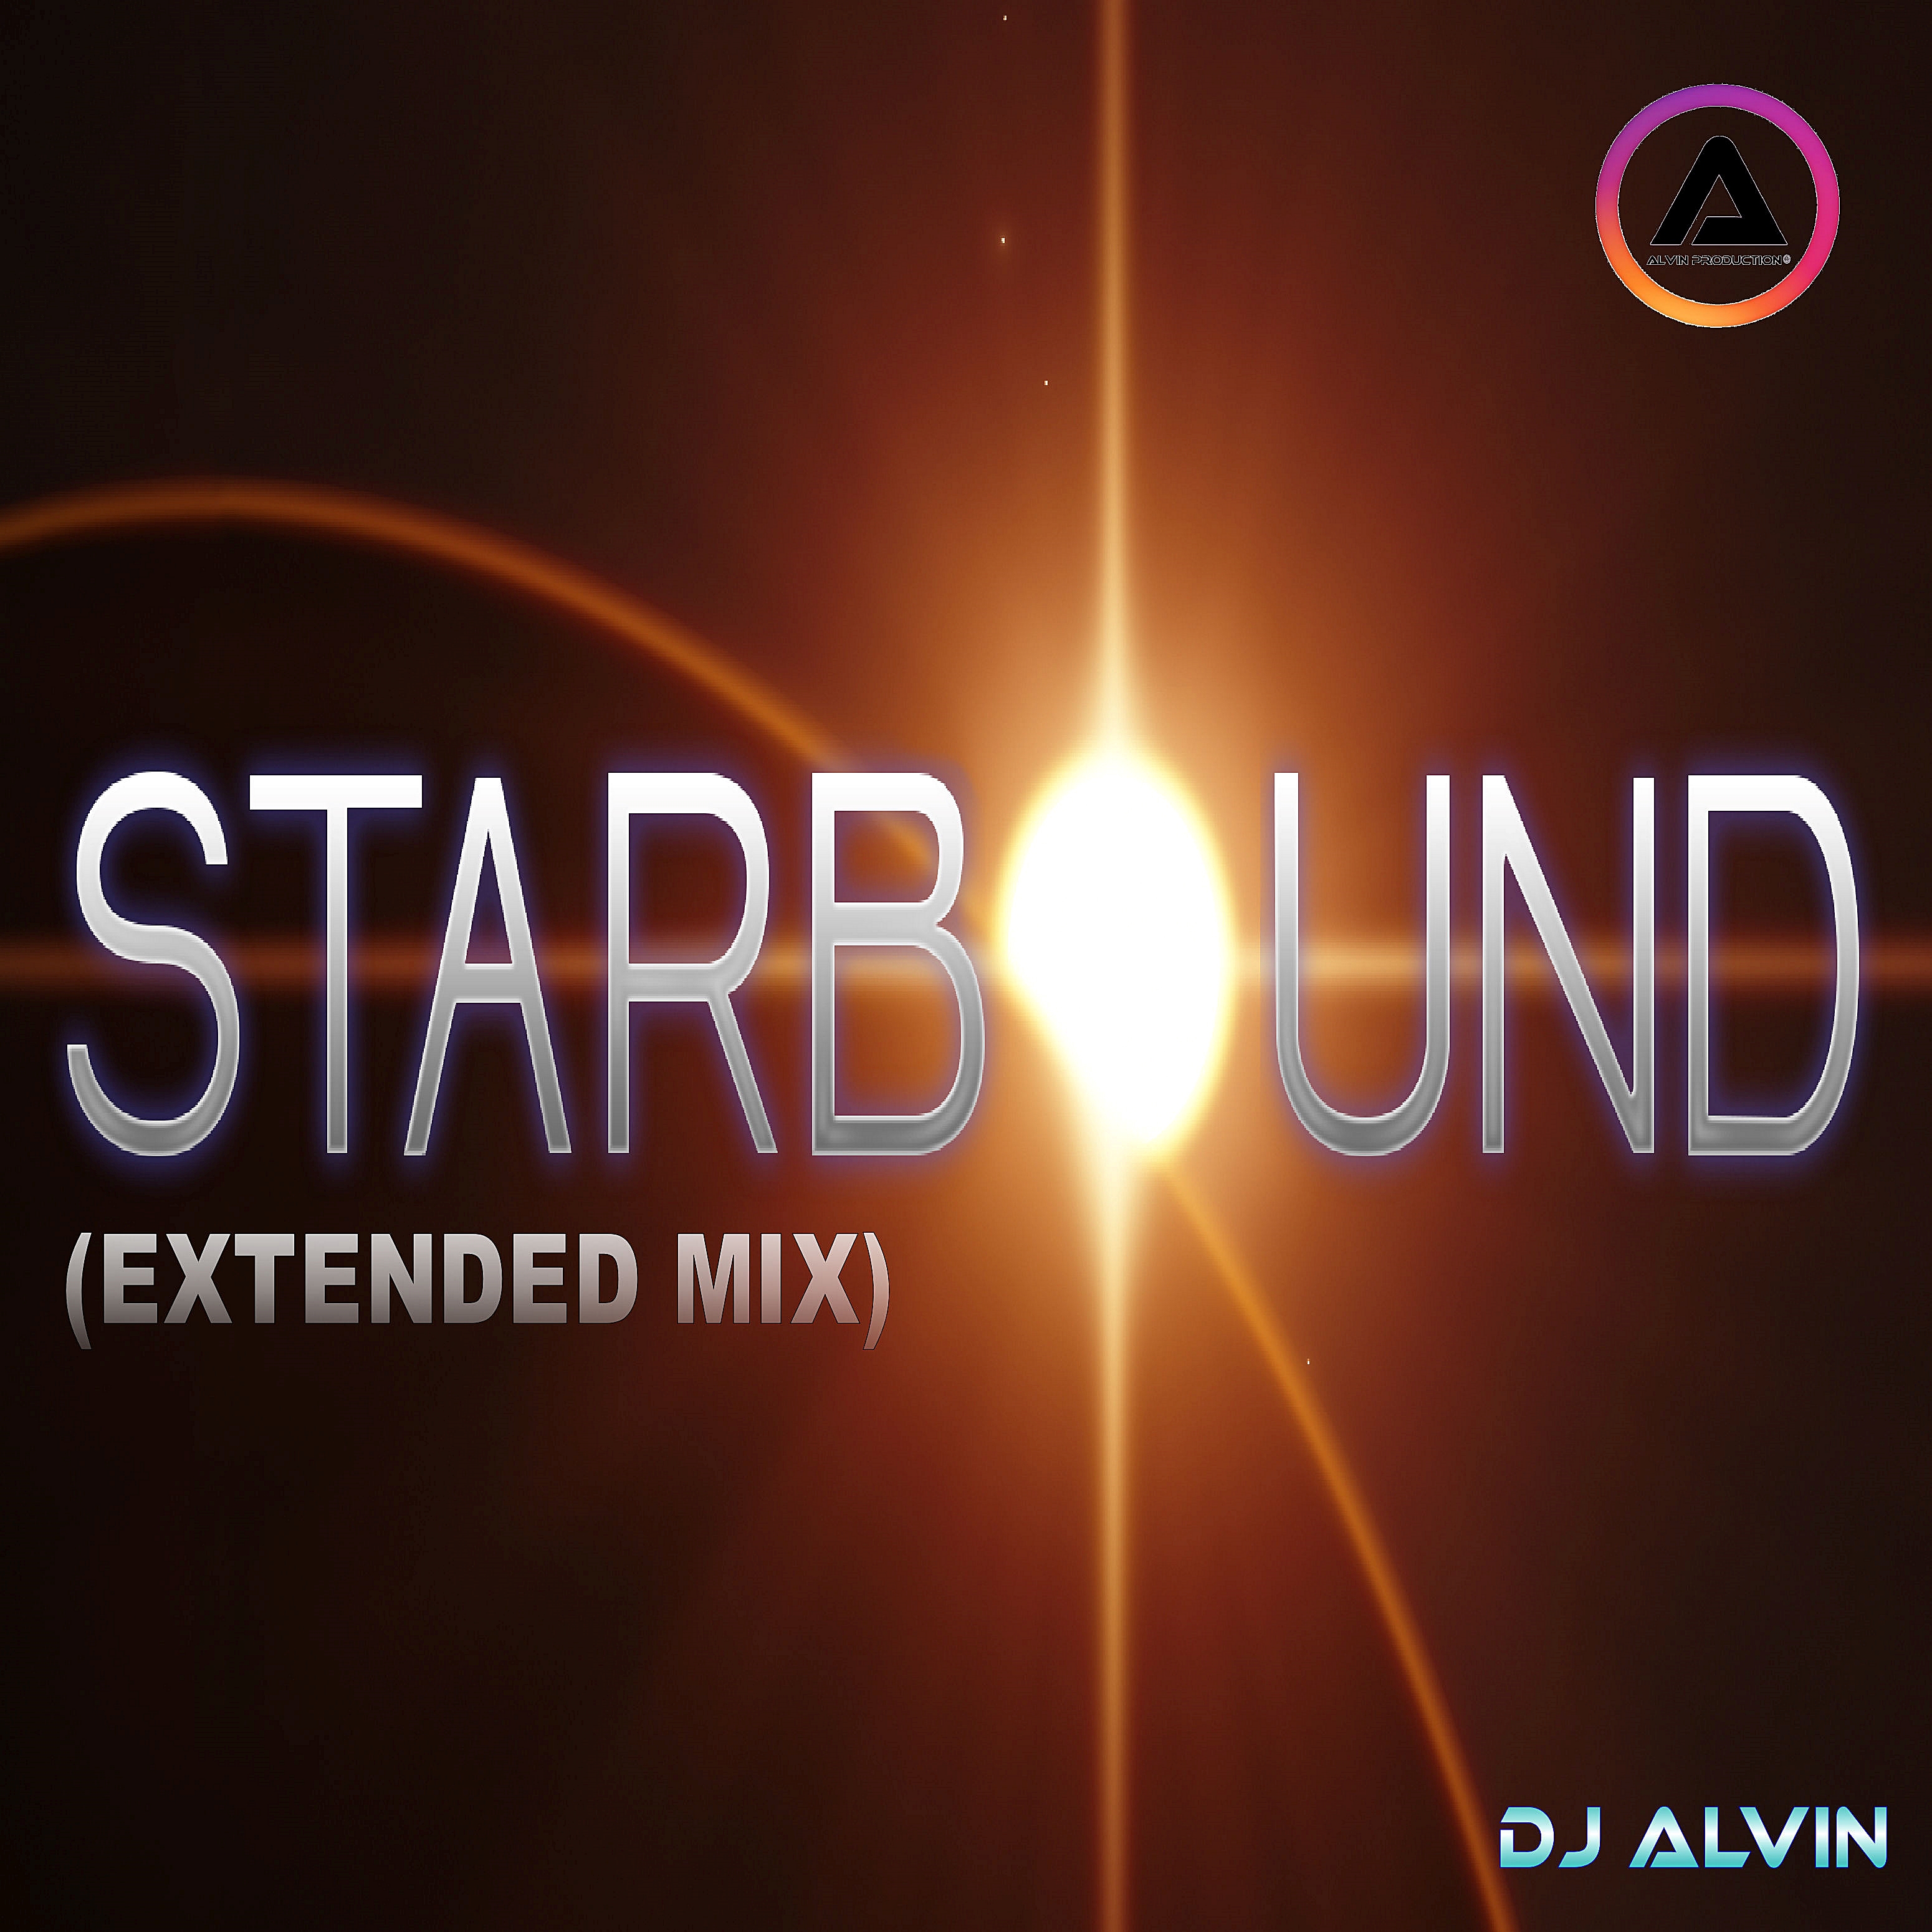 Starbound (Extended Mix)